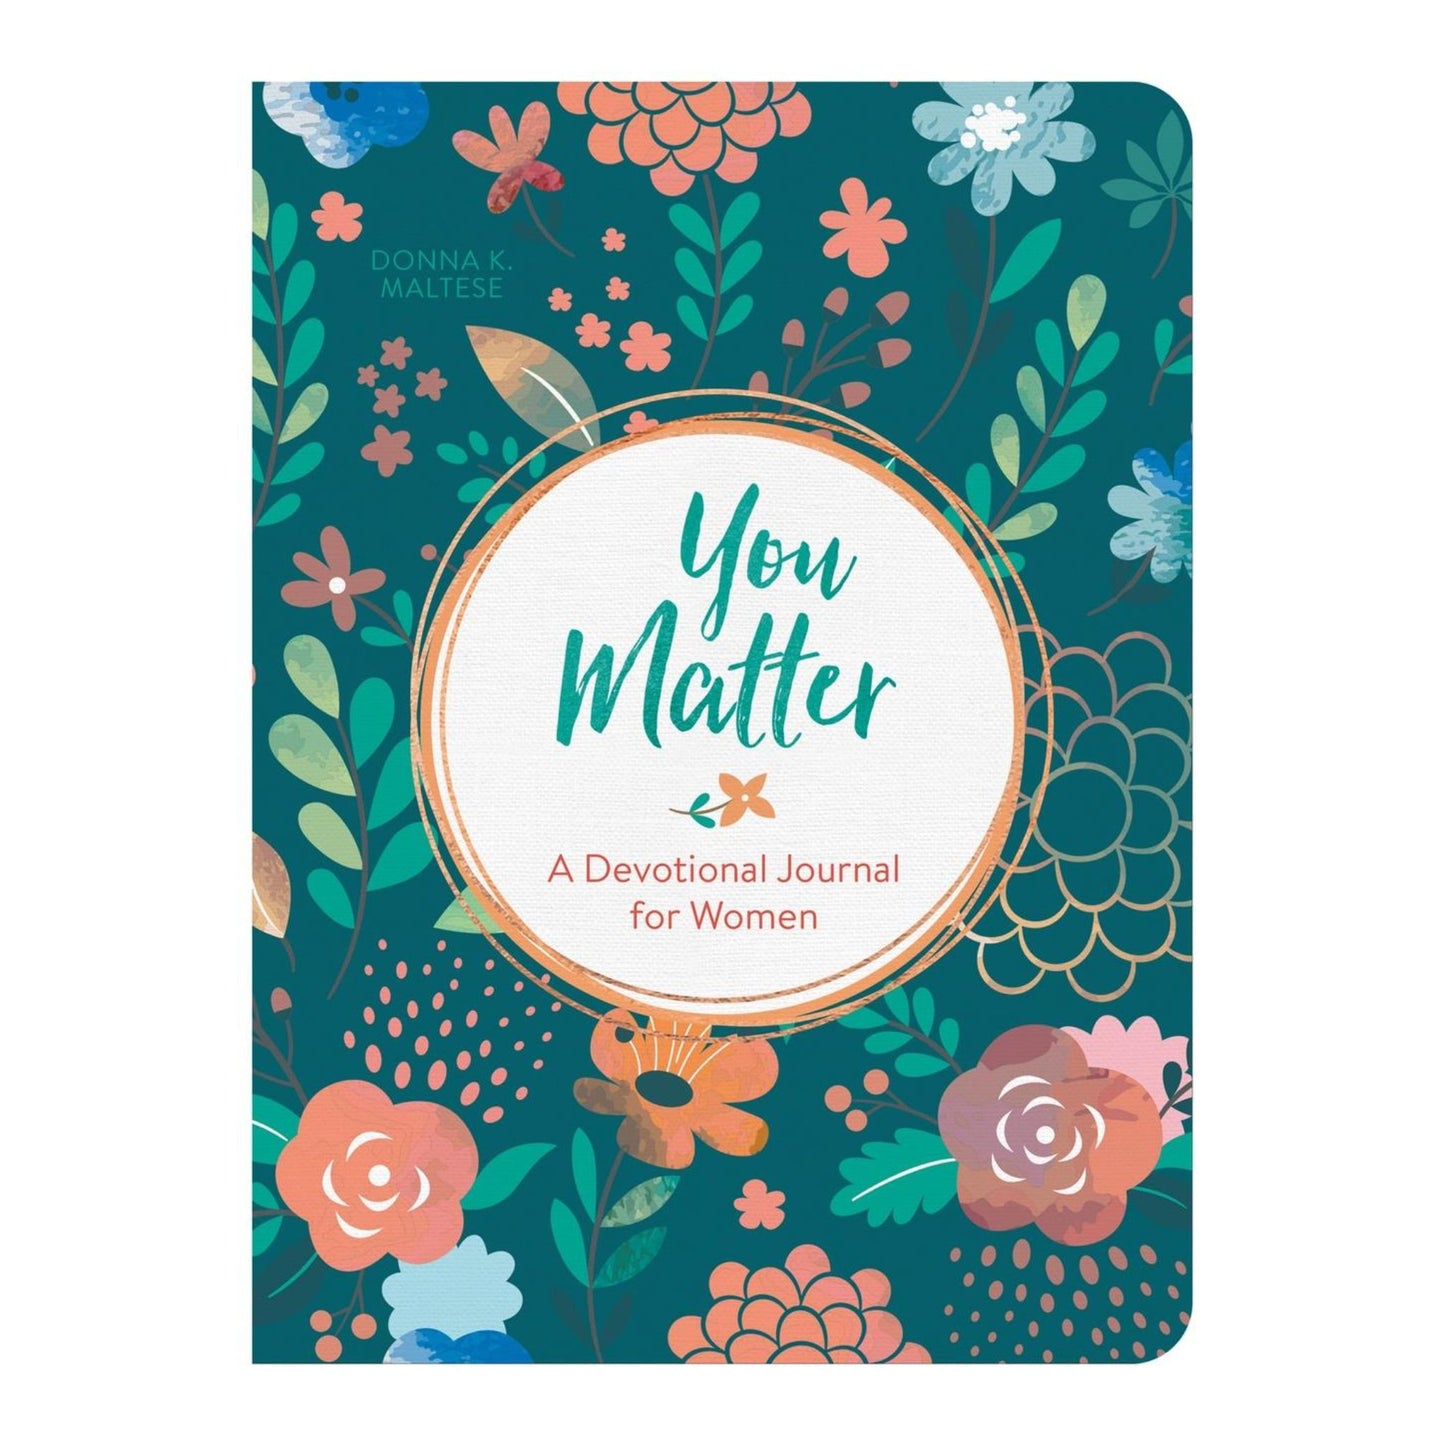 A close-up of "You Matter: A Devotional Journal for Women" showcasing a beautifully designed cover with floral accents.